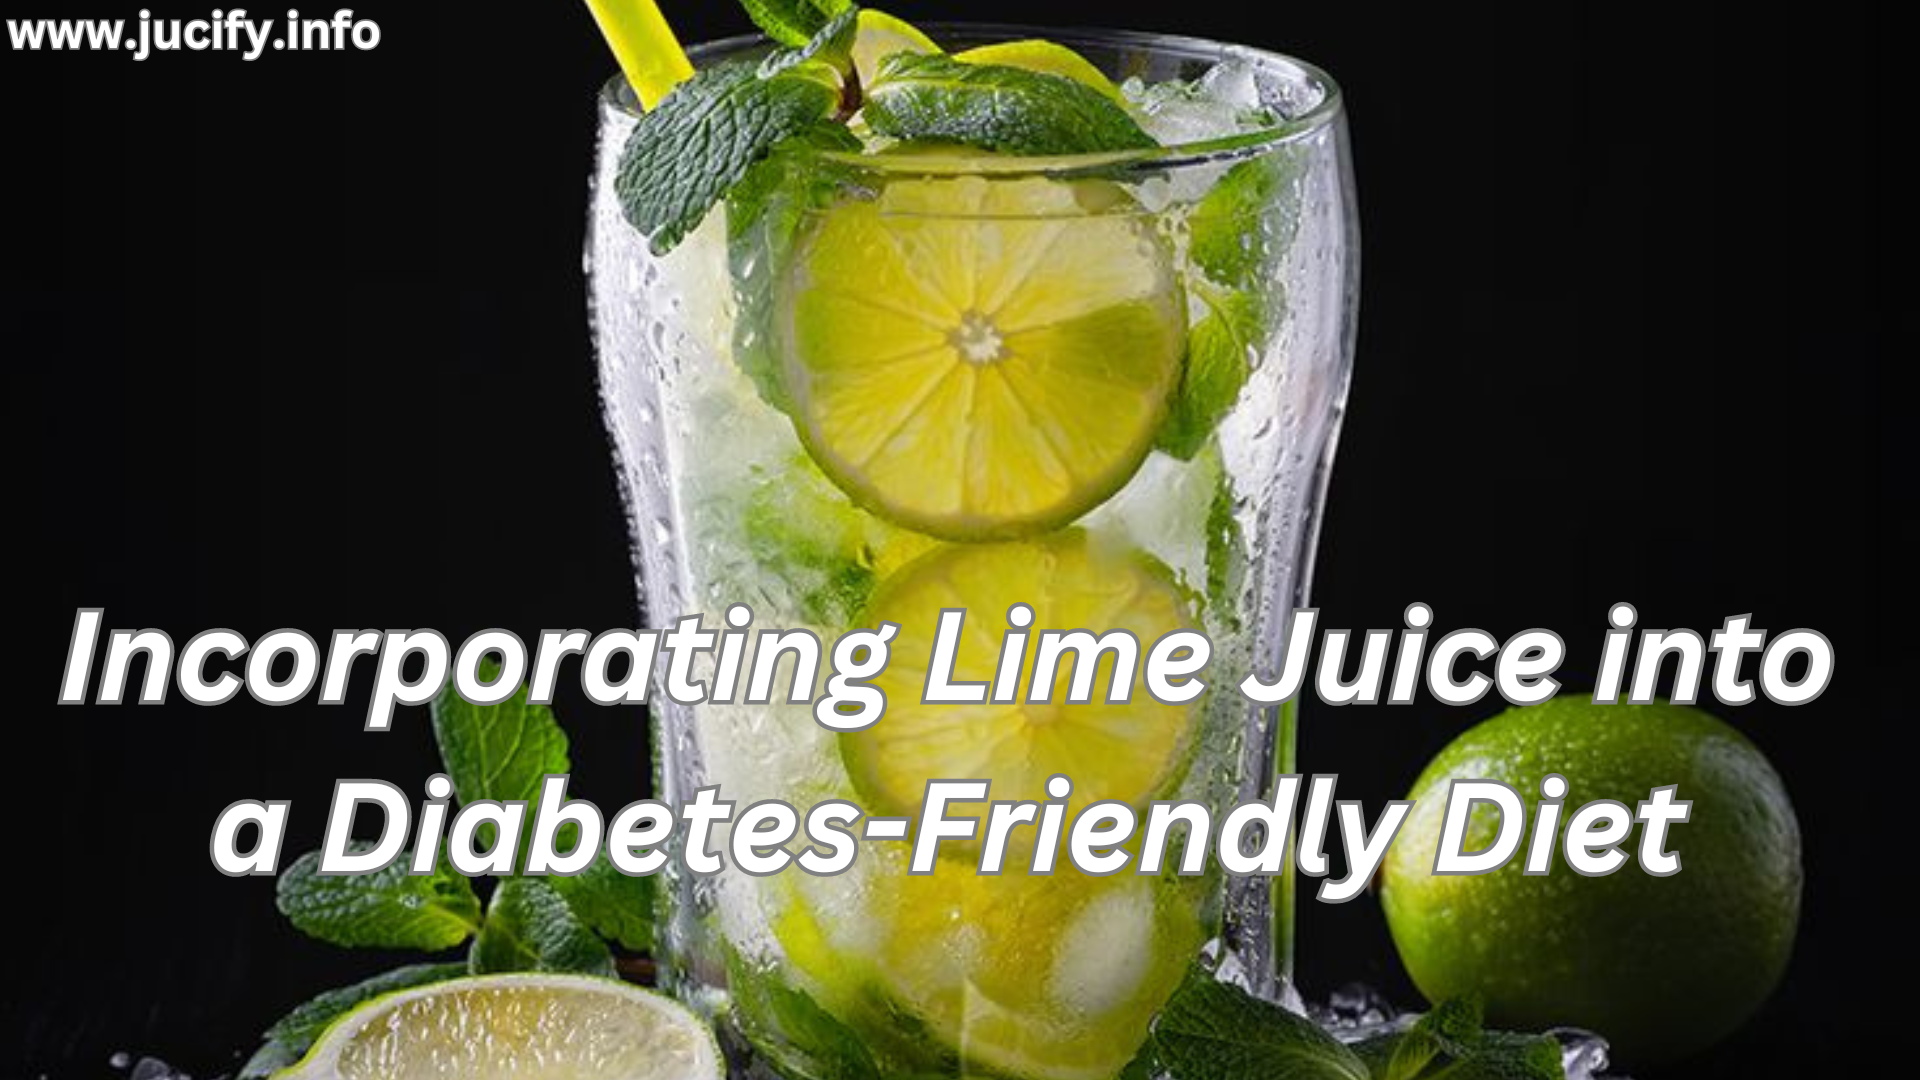 Incorporating Lime Juice into a Diabetes-Friendly Diet